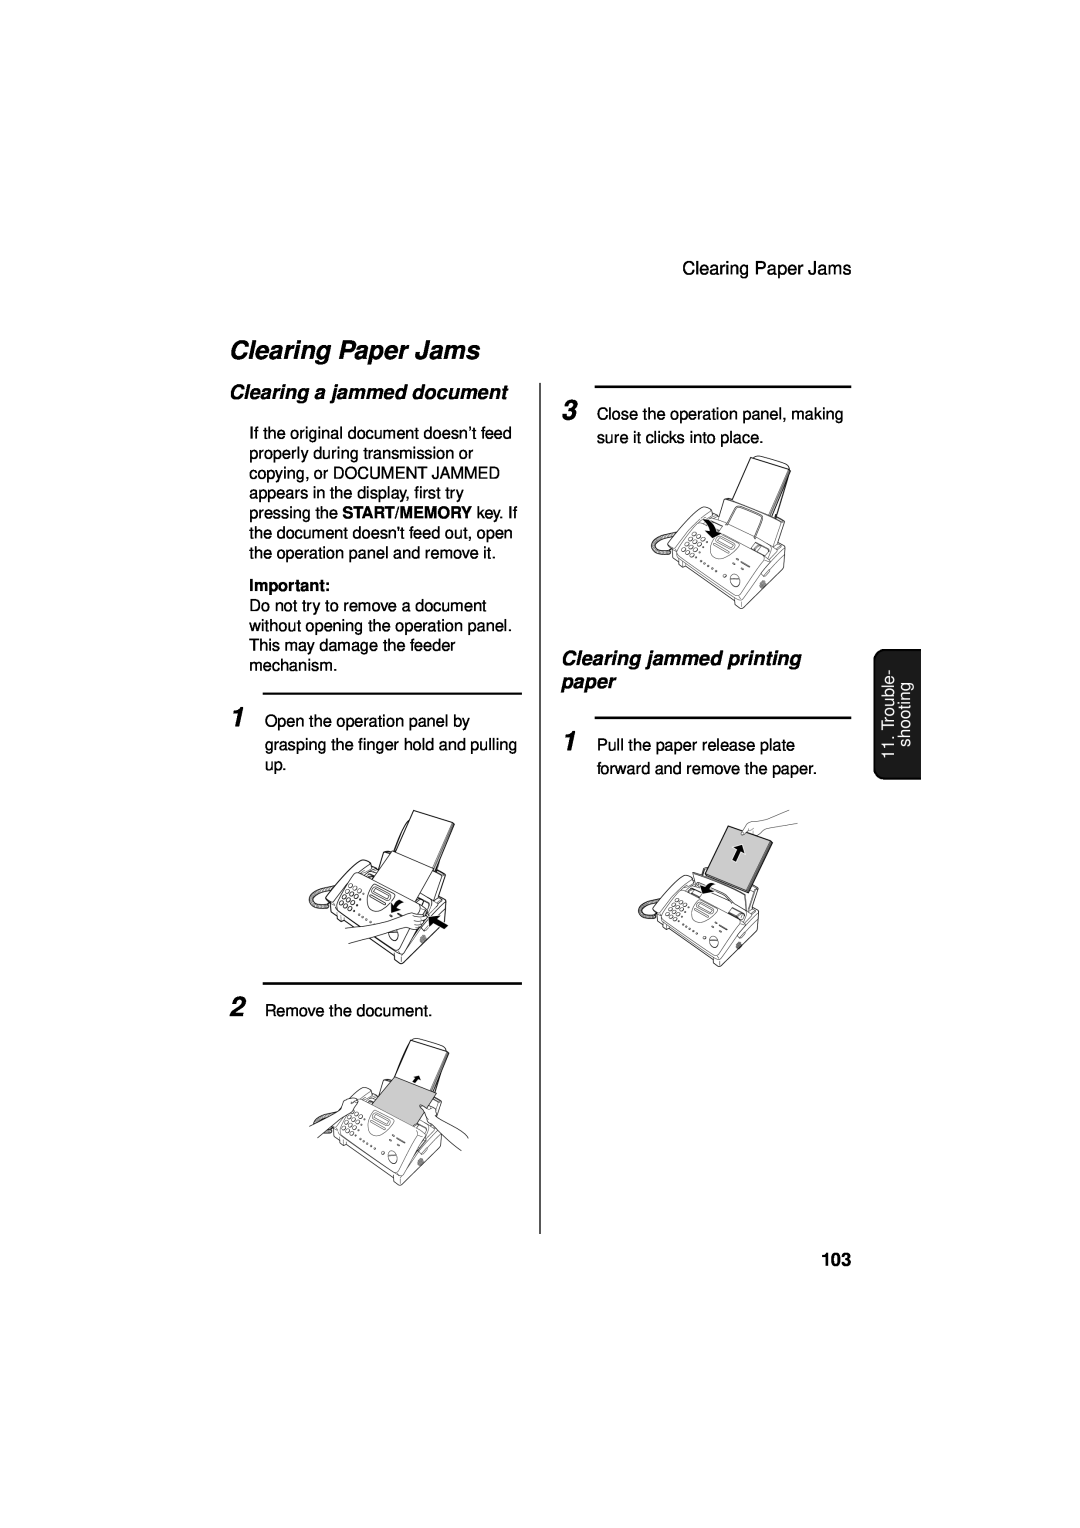 Sharp UX-340LM manual Clearing Paper Jams, Clearing a jammed document, Clearing jammed printing, paper, shooting 